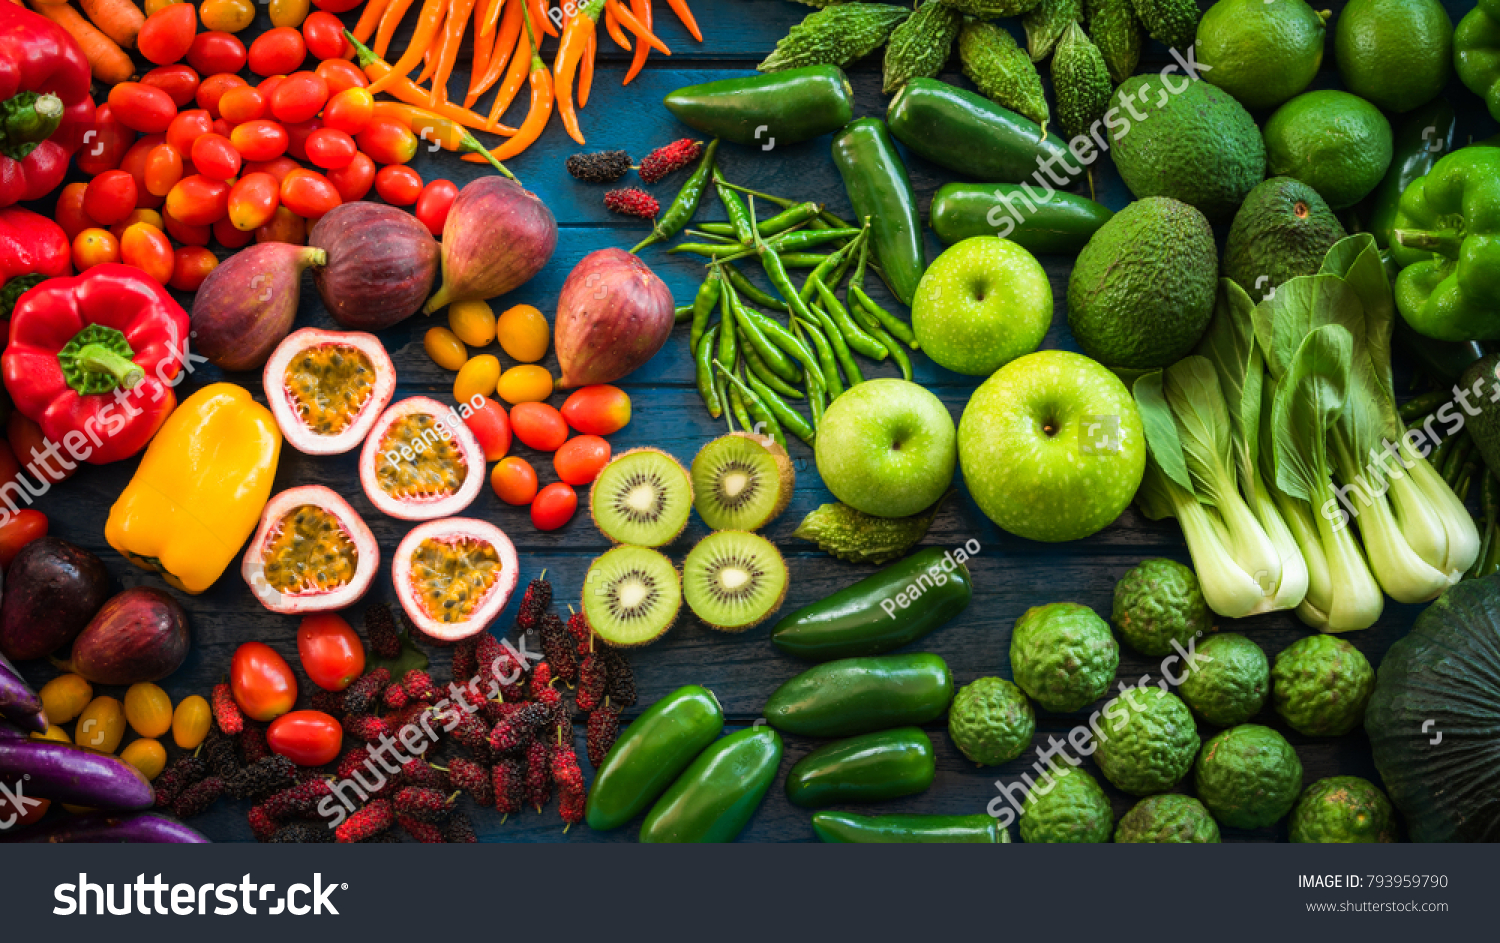 Flat lay of fresh  fruits and vegetables for background, Different fruits and vegetables for eating healthy, Colorful fruits and vegetables on blue plank background #793959790